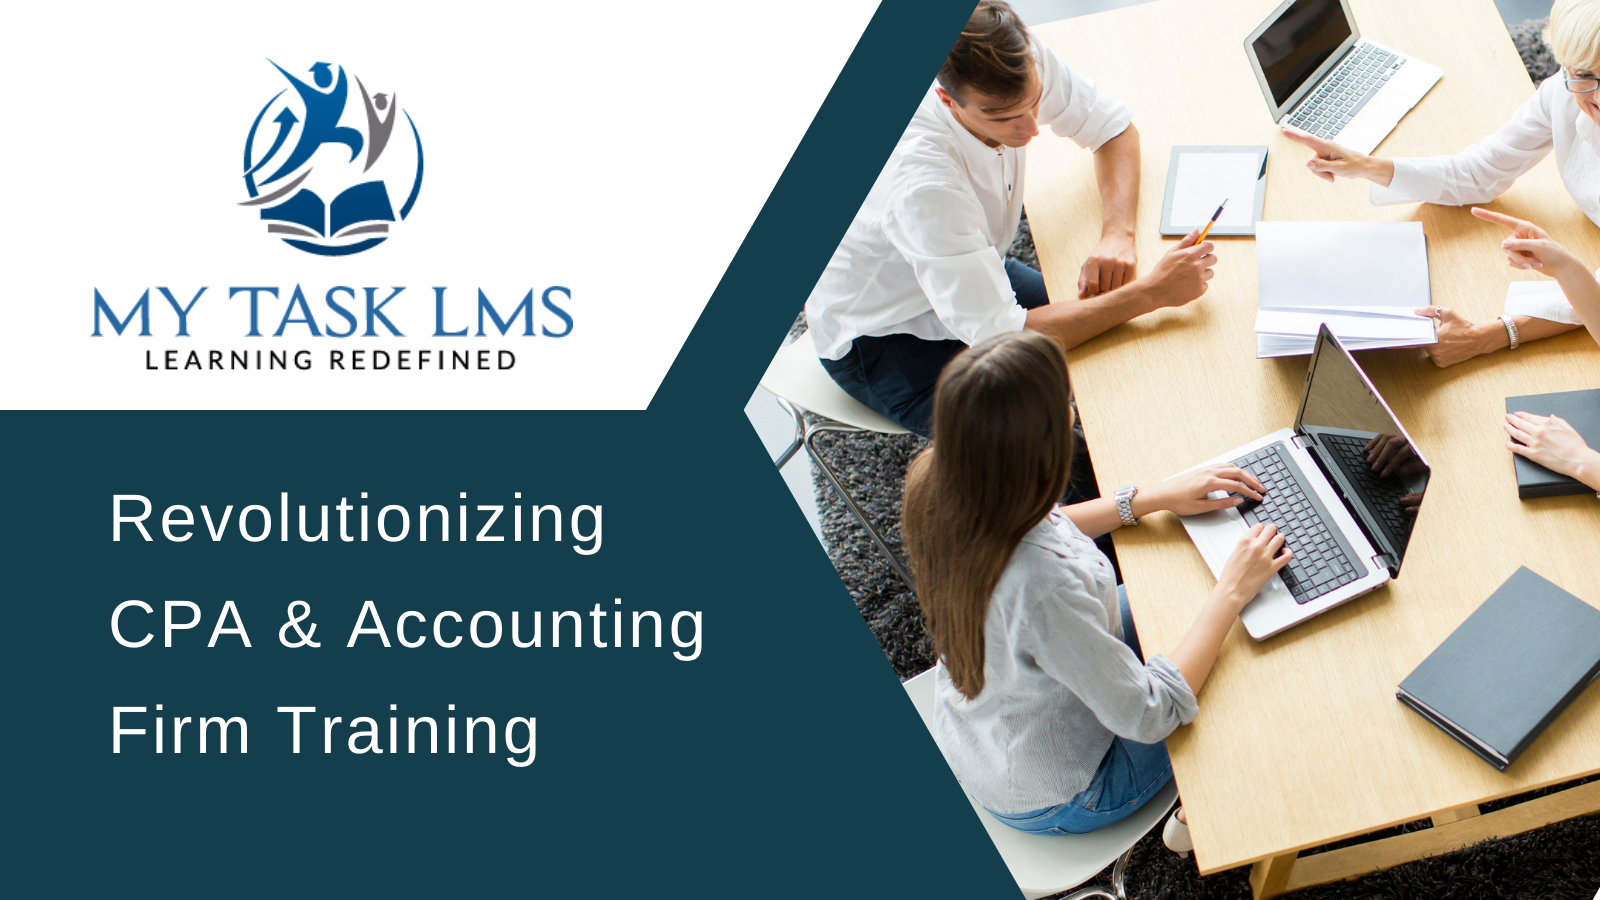 My Task LMS – Revolutionizing CPA and Accounting Firm Training!